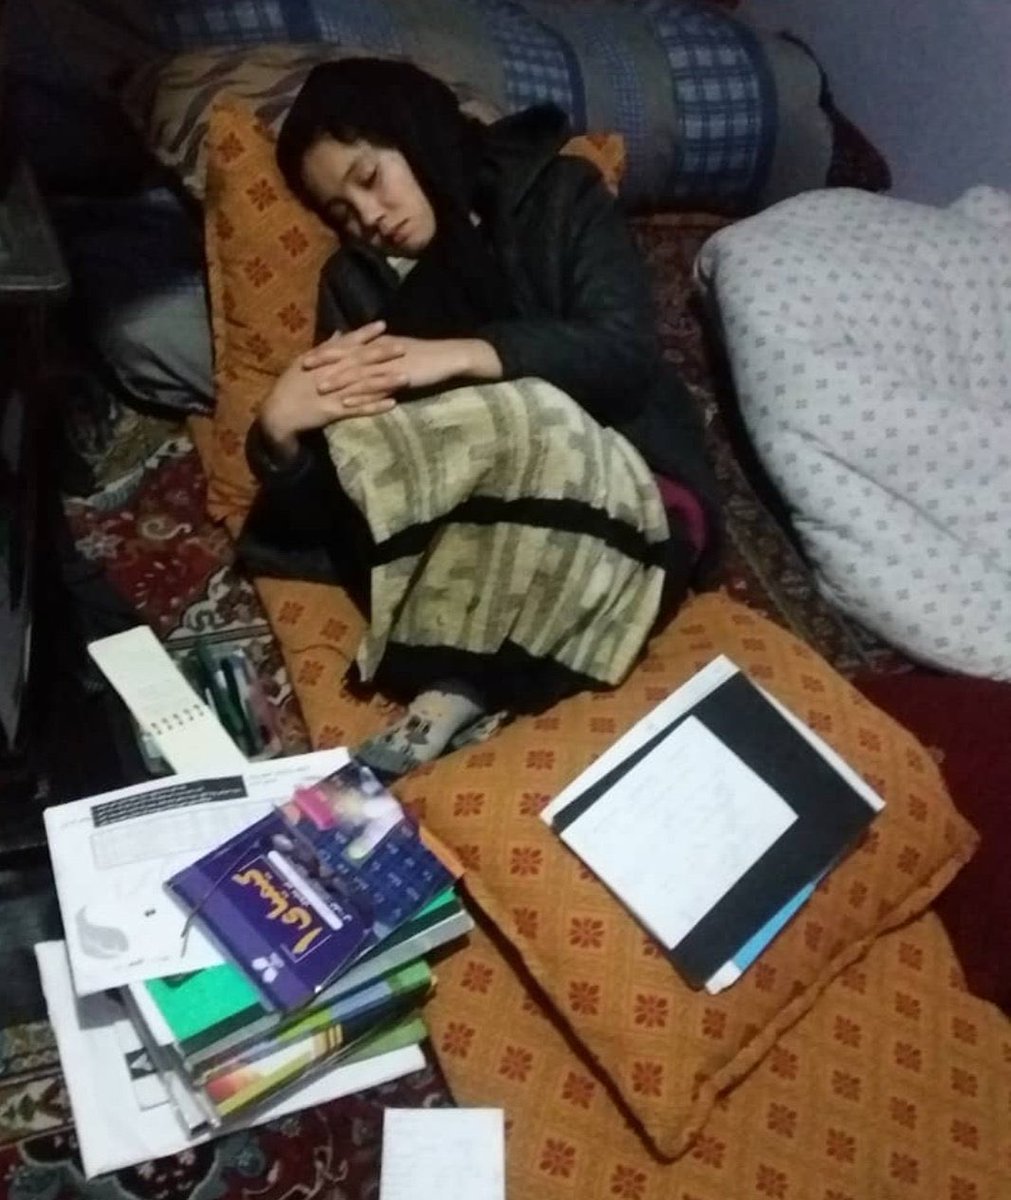 This is Shakiba. This is her studying Chemistry till late at home despite lack of heating & electricity. This was her glimmer of hope as the Taliban banned girls from school. She was killed in a terrorist attack last Friday at an education centre in Kabul, Afghanistan.